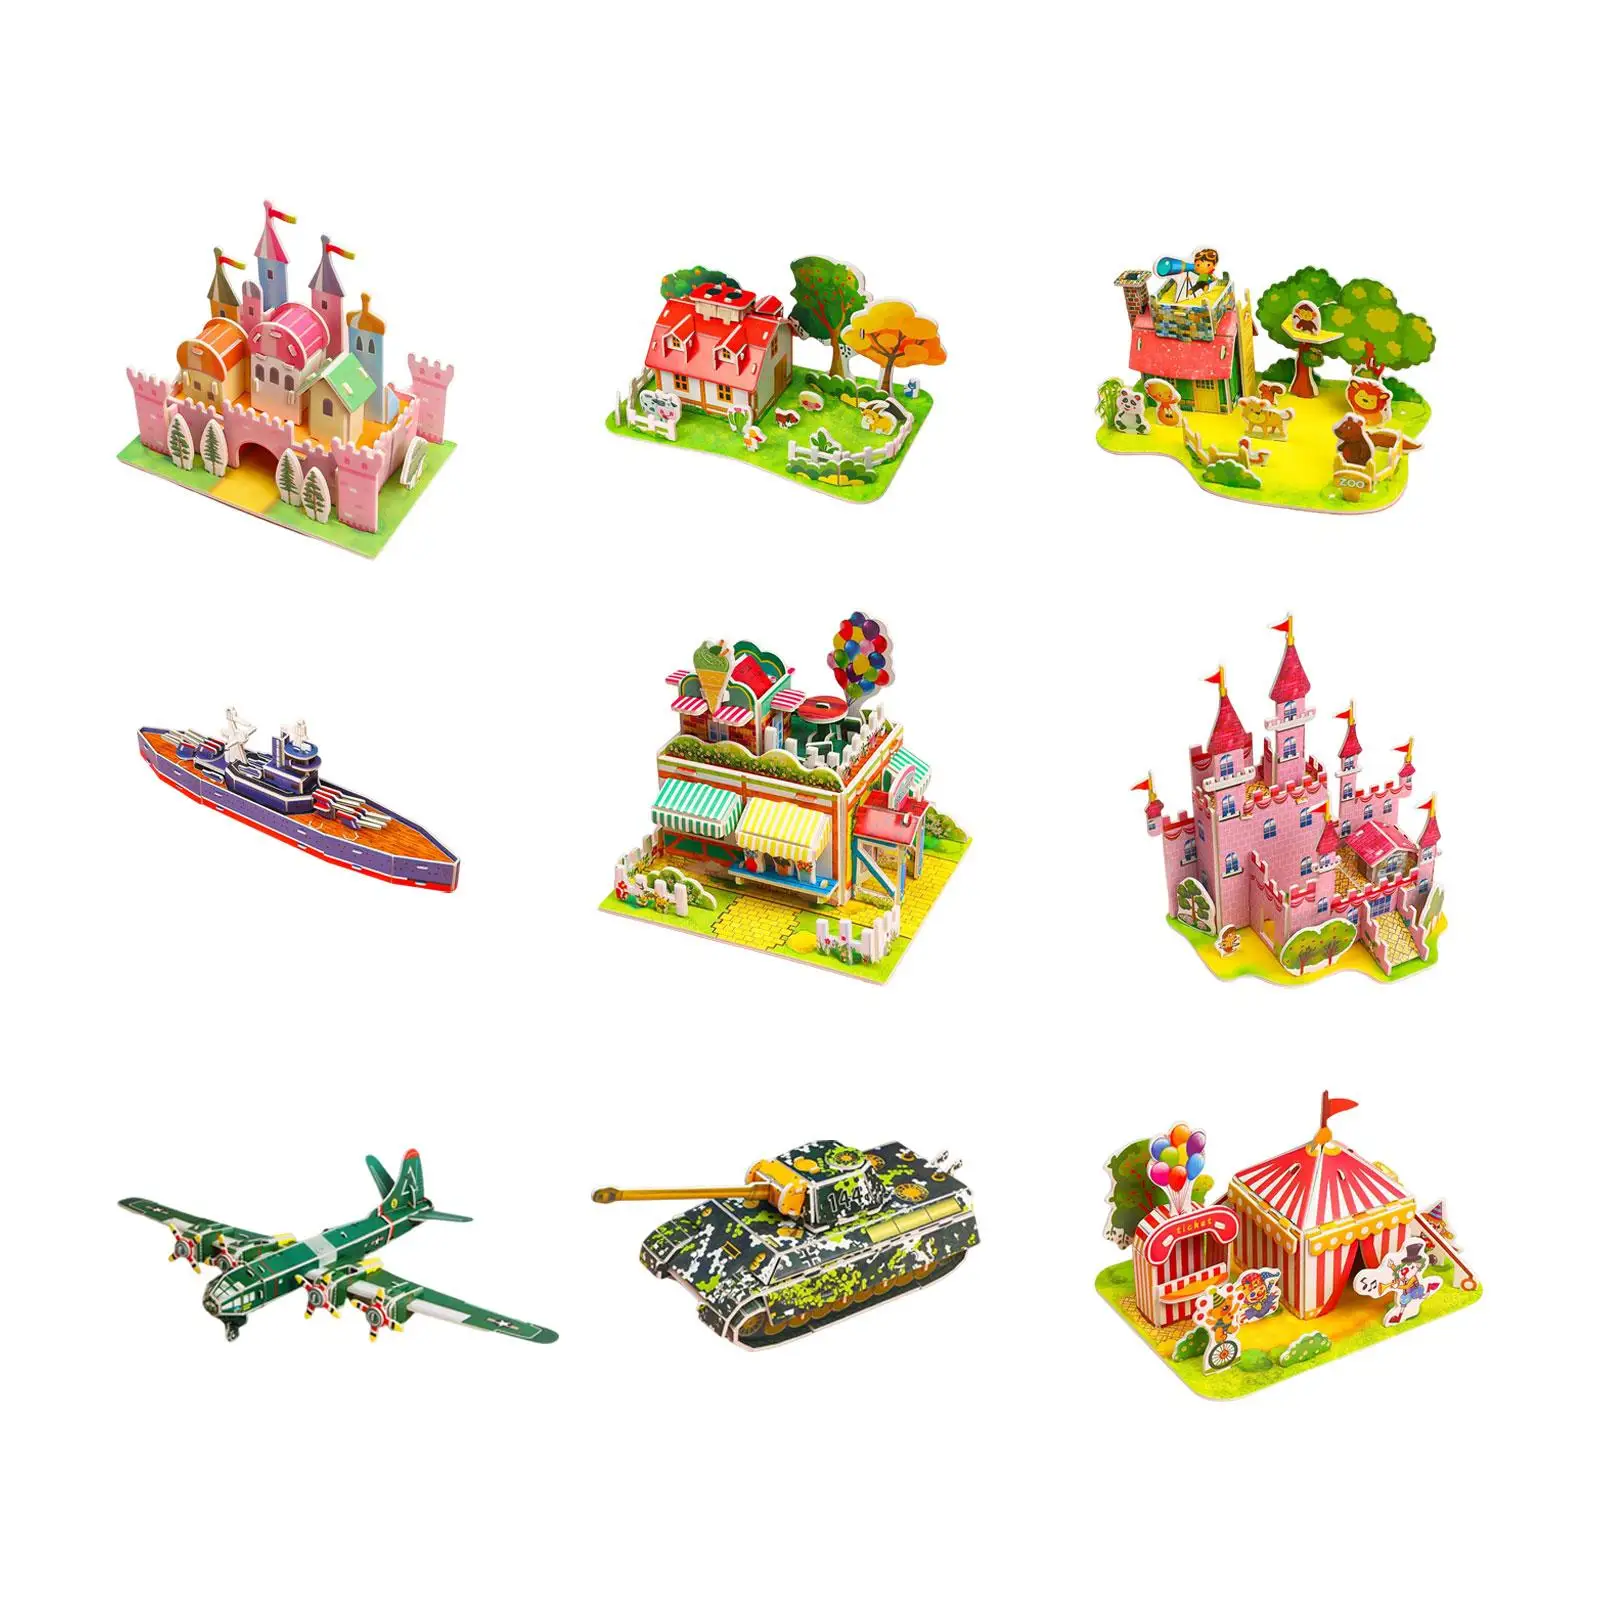 Creative DIY Toy Model Building Kit Assembly Construction Kit Toy Fun Paper Cardboard Mini House Puzzle Craft for Adults Teens